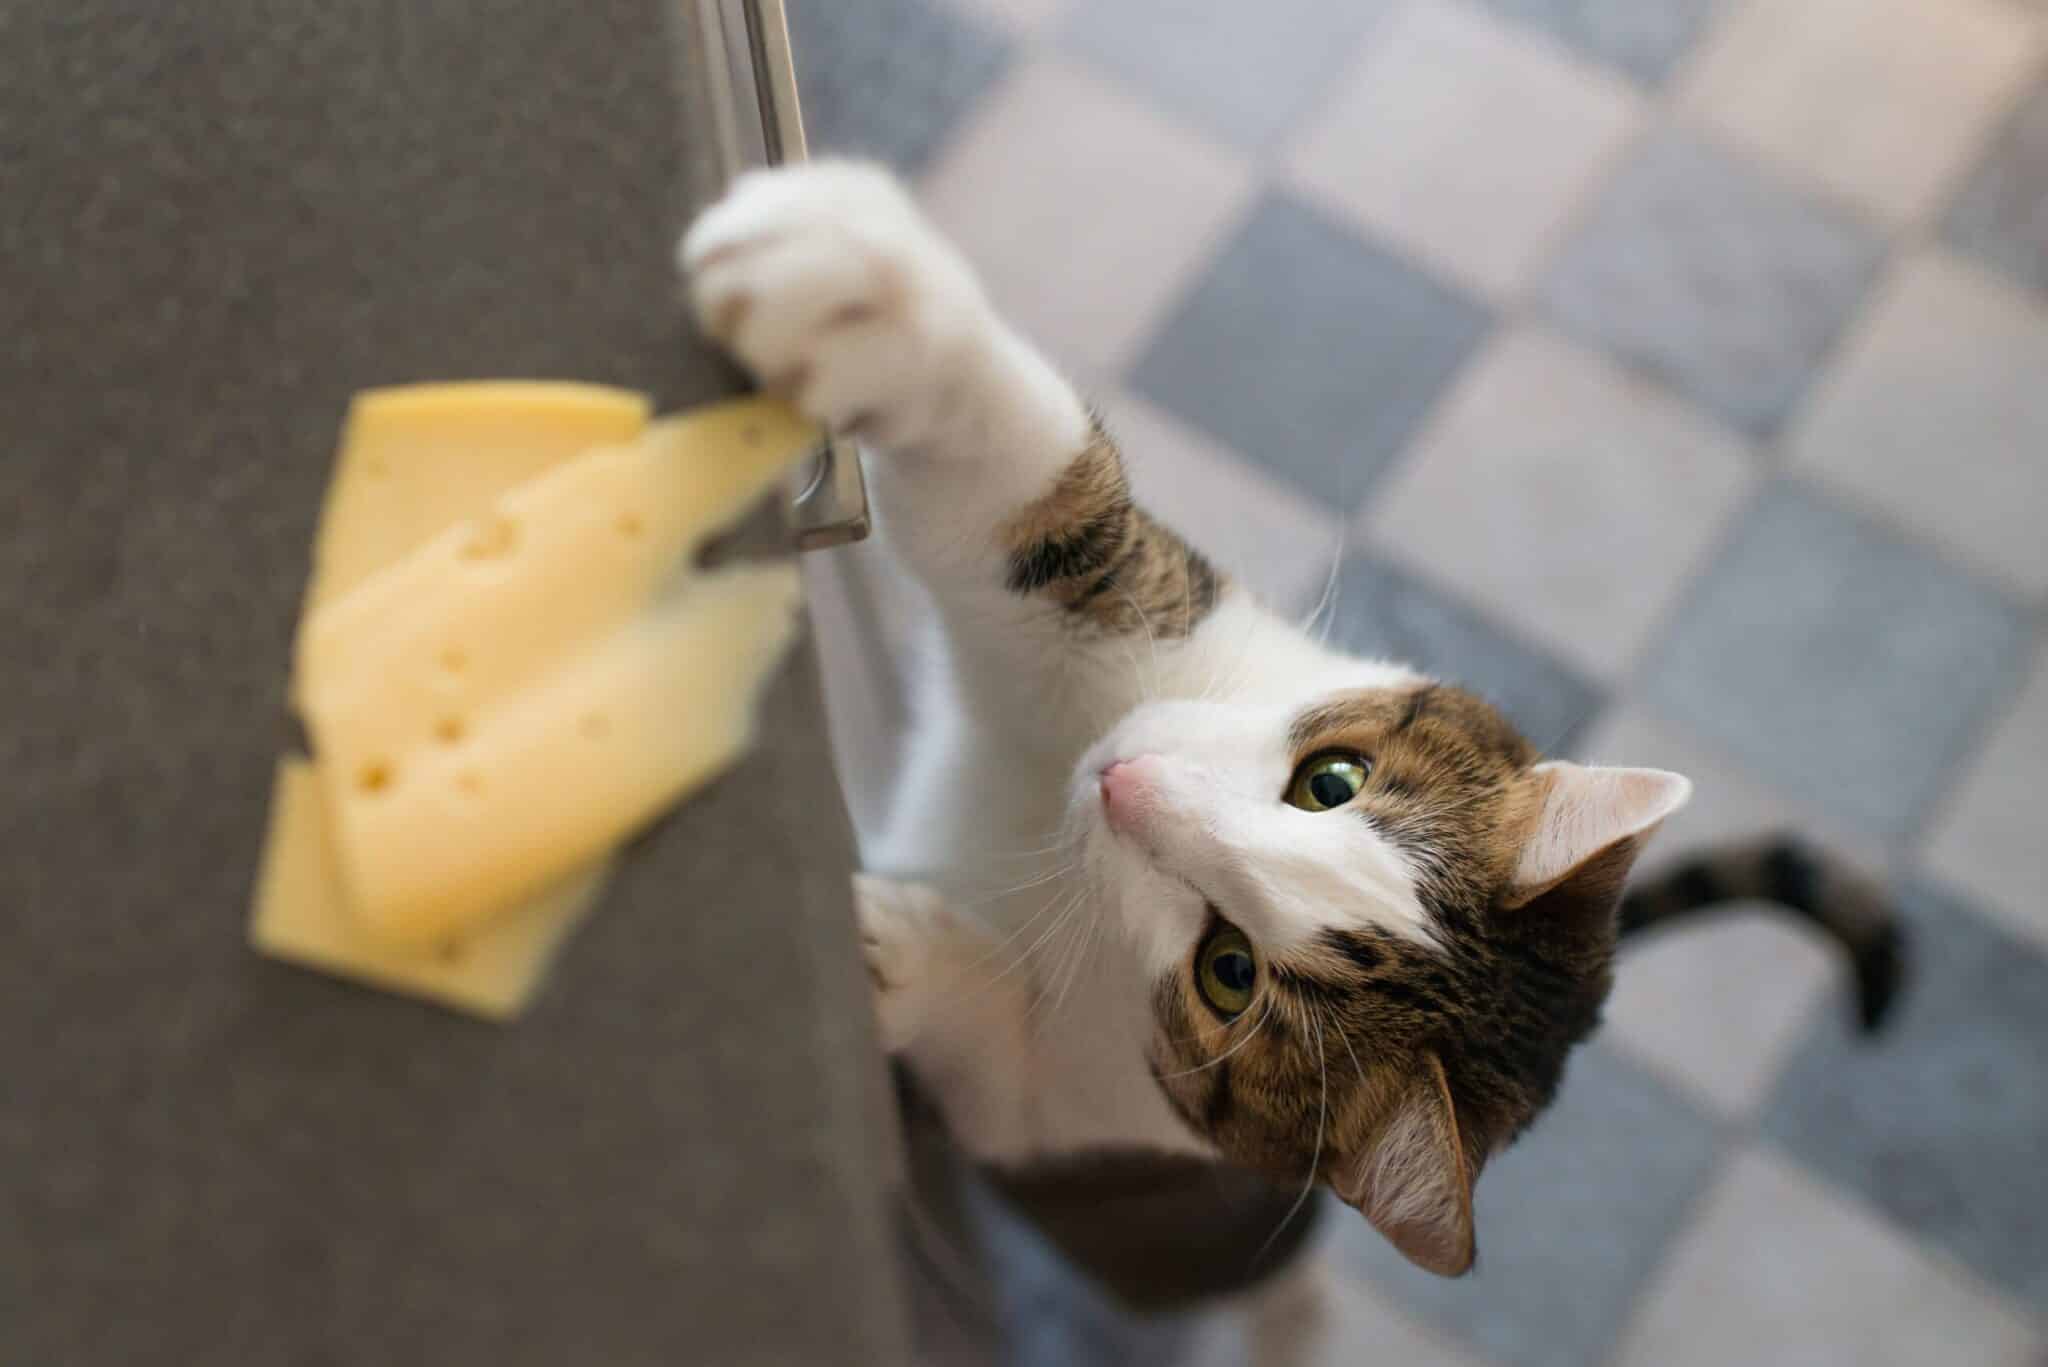 Cat stealing a piece of cheese